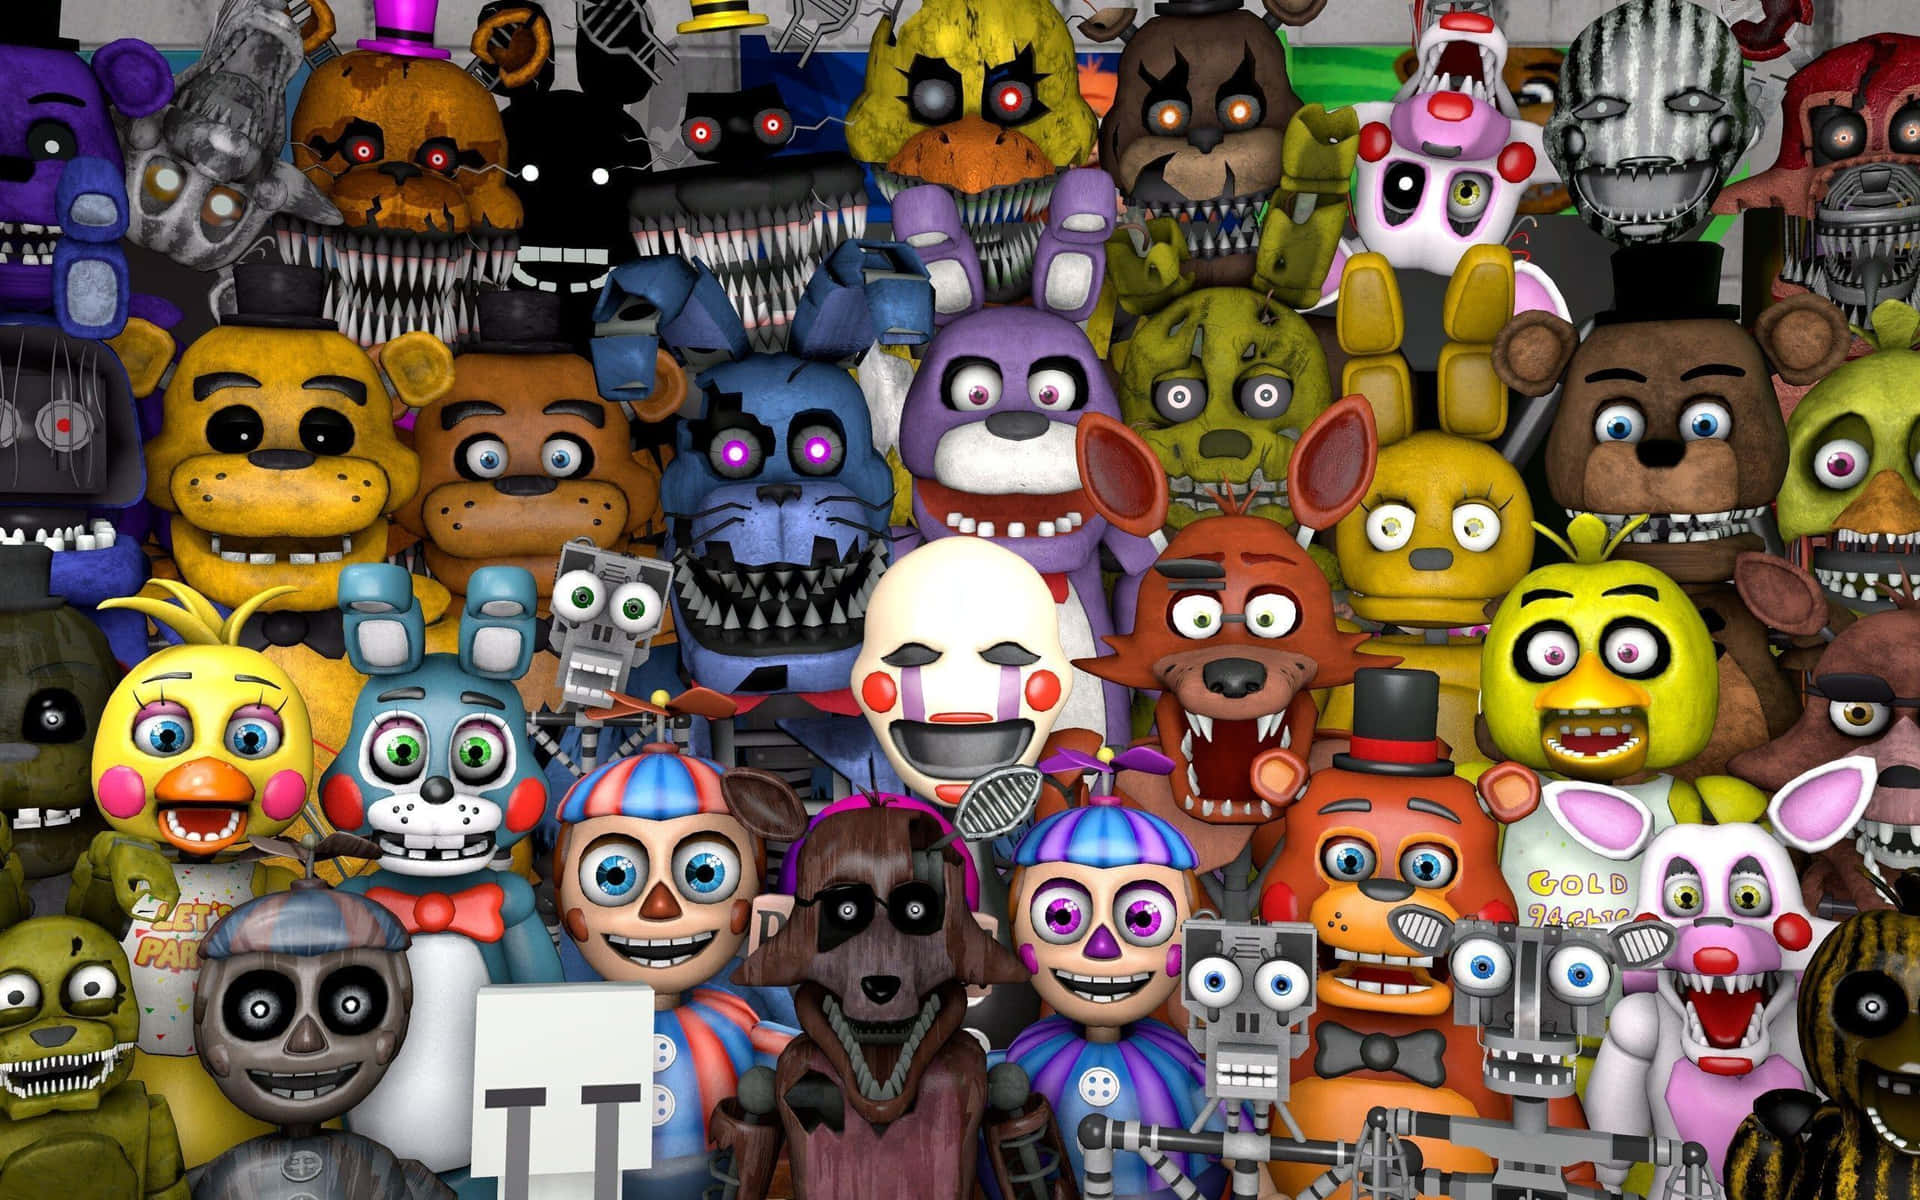 Free Tips For FNAF 1 2 3 4 SL APK for Android Download